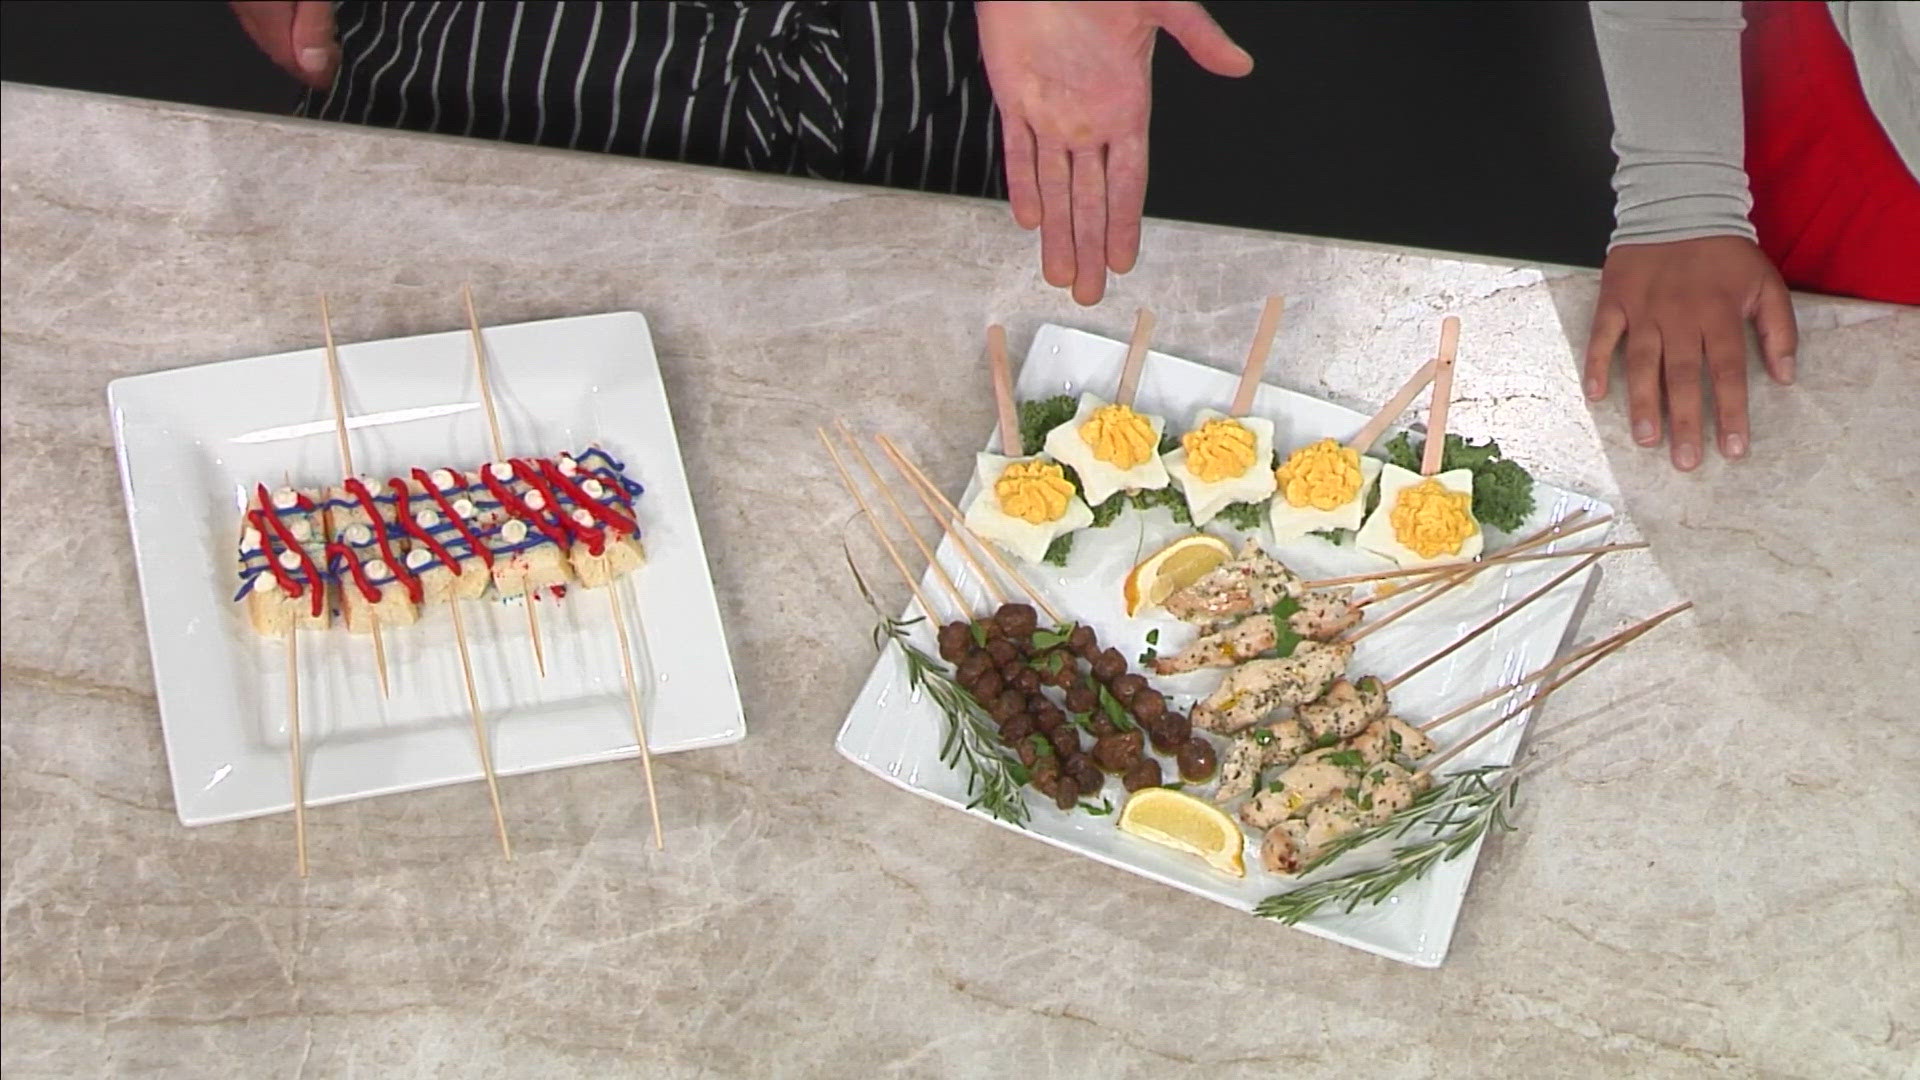 Chef Dallas Houle from the Escoffier School of Culinary Arts in Boulder gives ideas for easily transportable food for fireworks and barbeques!